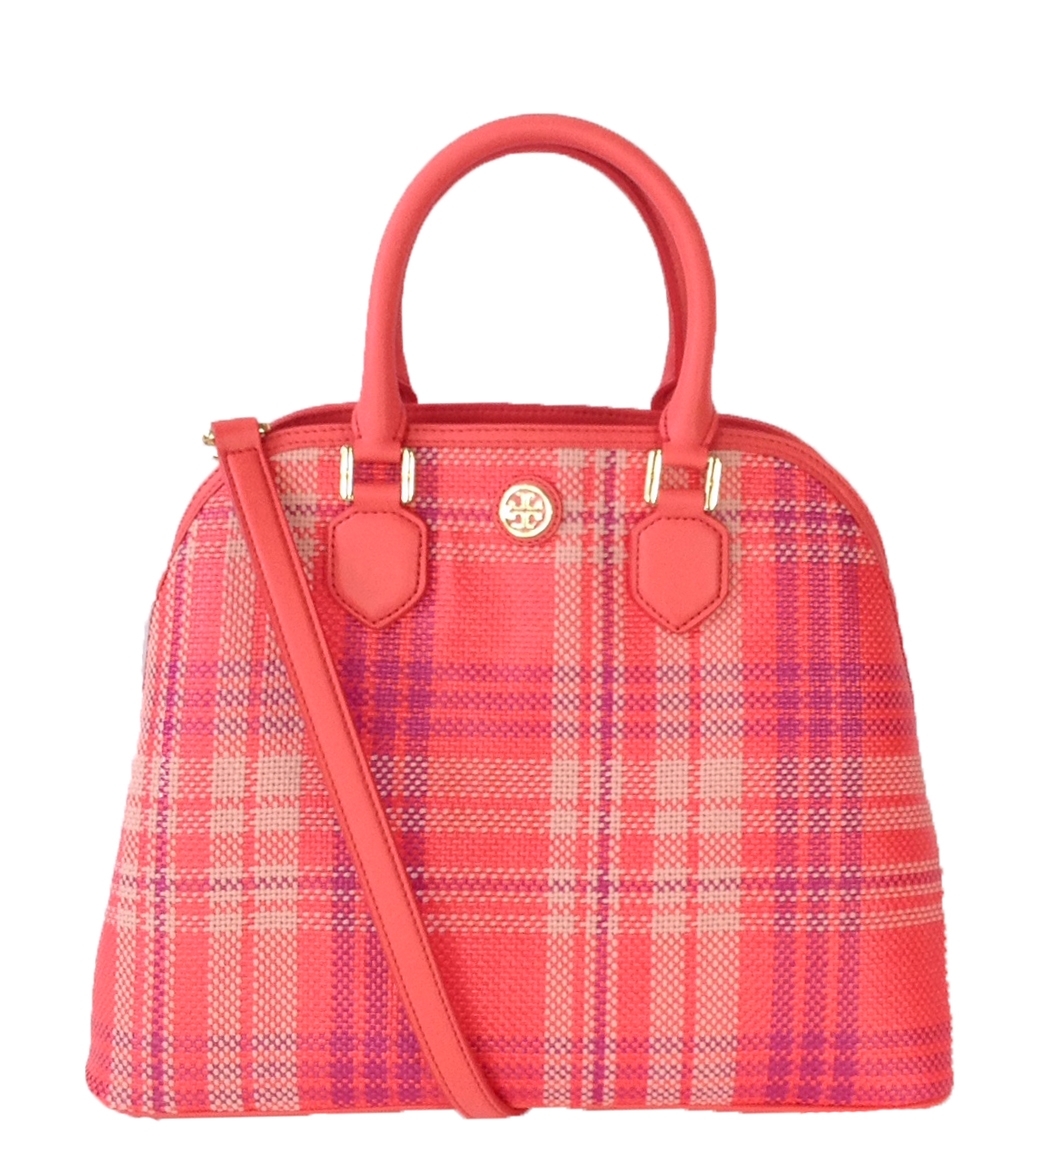 Tory Burch Robinson Plaid Large Open Dome Satchel, Poppy Coral/Carnation